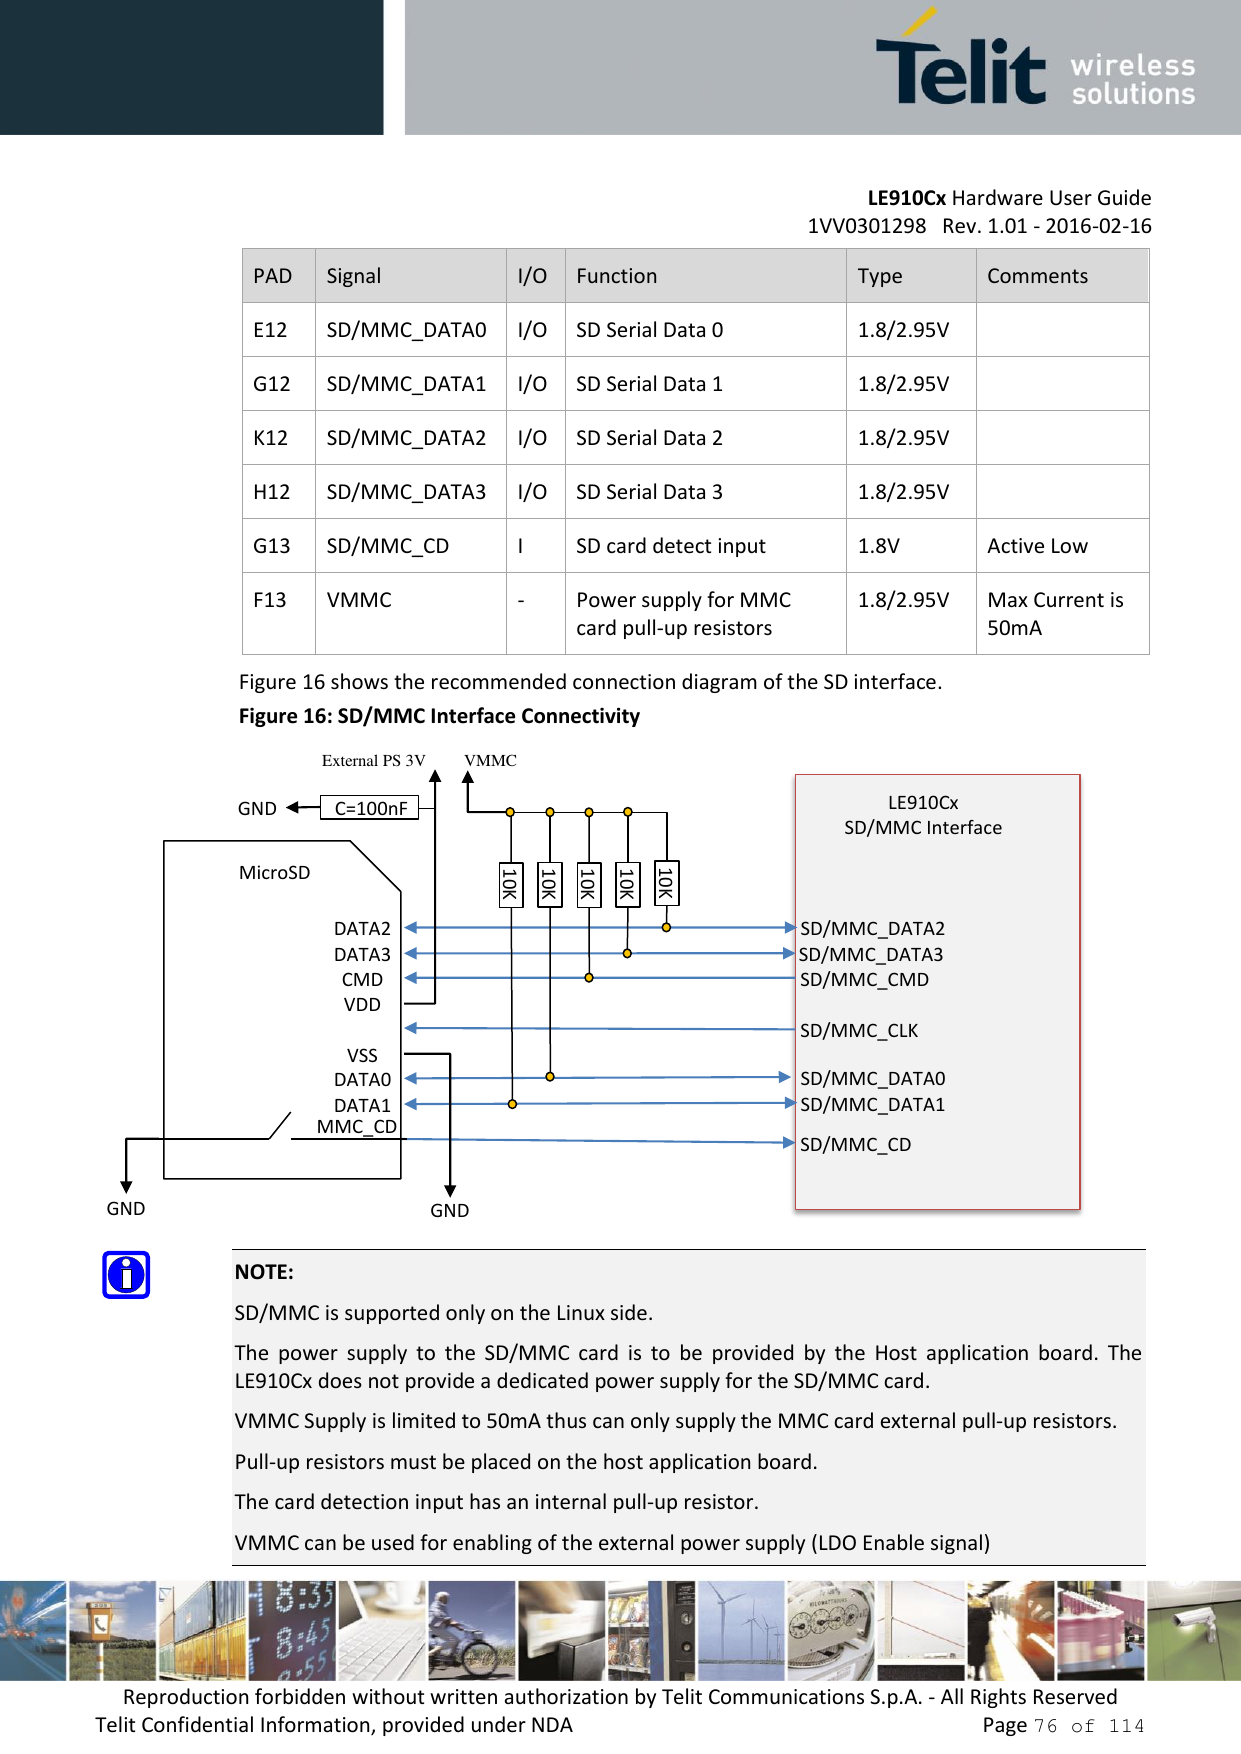         LE910Cx Hardware User Guide     1VV0301298   Rev. 1.01 - 2016-02-16 Reproduction forbidden without written authorization by Telit Communications S.p.A. - All Rights Reserved Telit Confidential Information, provided under NDA                 Page 76 of 114 PAD Signal I/O Function Type Comments E12 SD/MMC_DATA0 I/O SD Serial Data 0 1.8/2.95V  G12 SD/MMC_DATA1 I/O SD Serial Data 1 1.8/2.95V  K12 SD/MMC_DATA2 I/O SD Serial Data 2 1.8/2.95V  H12 SD/MMC_DATA3 I/O SD Serial Data 3 1.8/2.95V  G13 SD/MMC_CD I SD card detect input 1.8V Active Low F13 VMMC - Power supply for MMC card pull-up resistors 1.8/2.95V Max Current is 50mA Figure 16 shows the recommended connection diagram of the SD interface. Figure 16: SD/MMC Interface Connectivity   NOTE: SD/MMC is supported only on the Linux side. The  power  supply  to  the  SD/MMC  card  is  to  be  provided  by  the  Host  application  board.  The LE910Cx does not provide a dedicated power supply for the SD/MMC card. VMMC Supply is limited to 50mA thus can only supply the MMC card external pull-up resistors. Pull-up resistors must be placed on the host application board. The card detection input has an internal pull-up resistor. VMMC can be used for enabling of the external power supply (LDO Enable signal) SD/MMC_DATA2 SD/MMC_DATA3  SD/MMC_CMD  SD/MMC_CLK SD/MMC_DATA0 SD/MMC_DATA1 LE910Cx SD/MMC Interface   SD/MMC_CD DATA2 DATA3 CMD VDD VSS DATA0 DATA1 MicroSD MMC_CD GND GND 10K 10K 10K 10K 10K  C=100nF GND External PS 3V  VMMC 